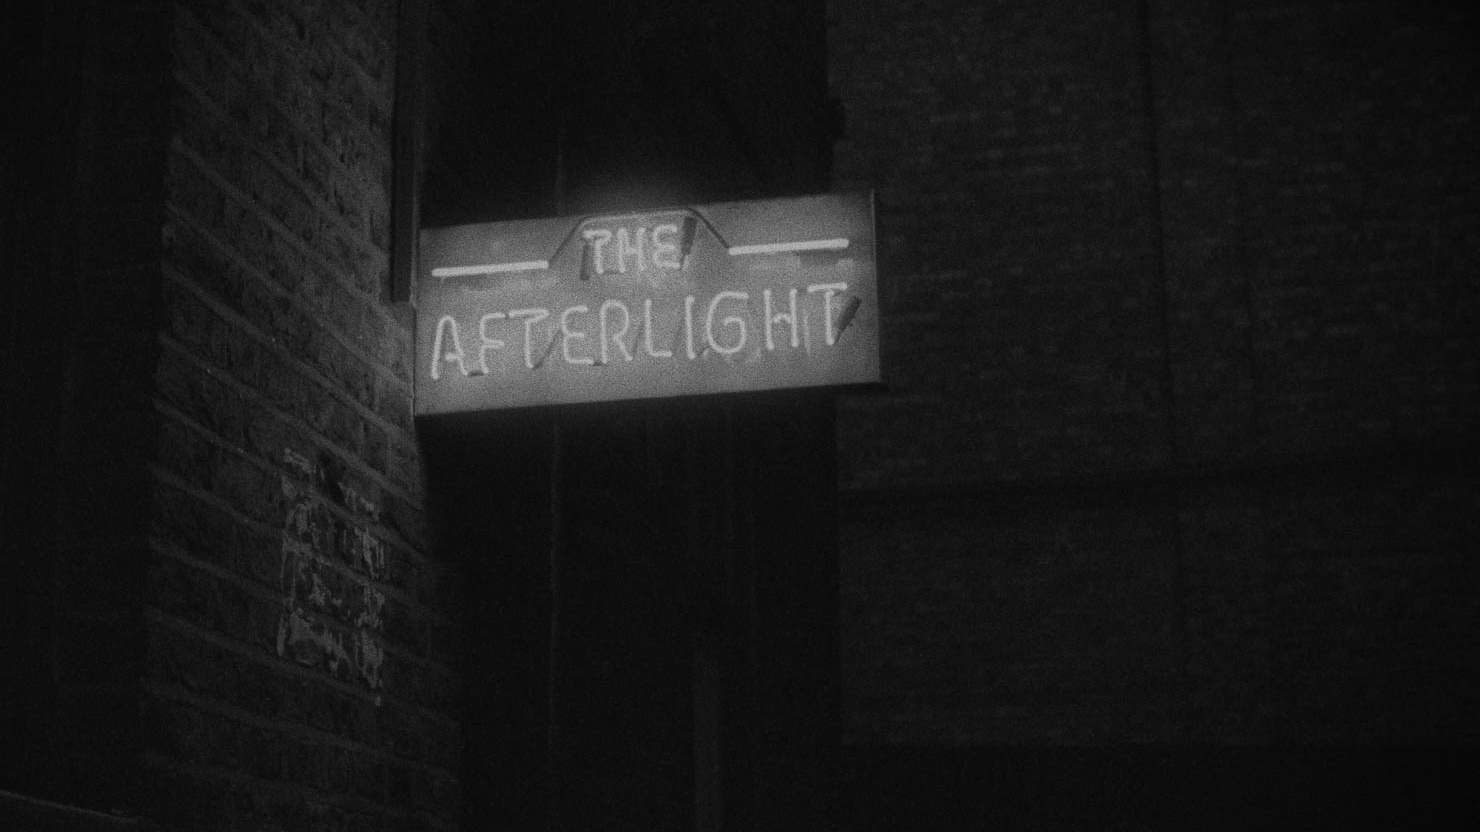 Video Essay: The Afterlight